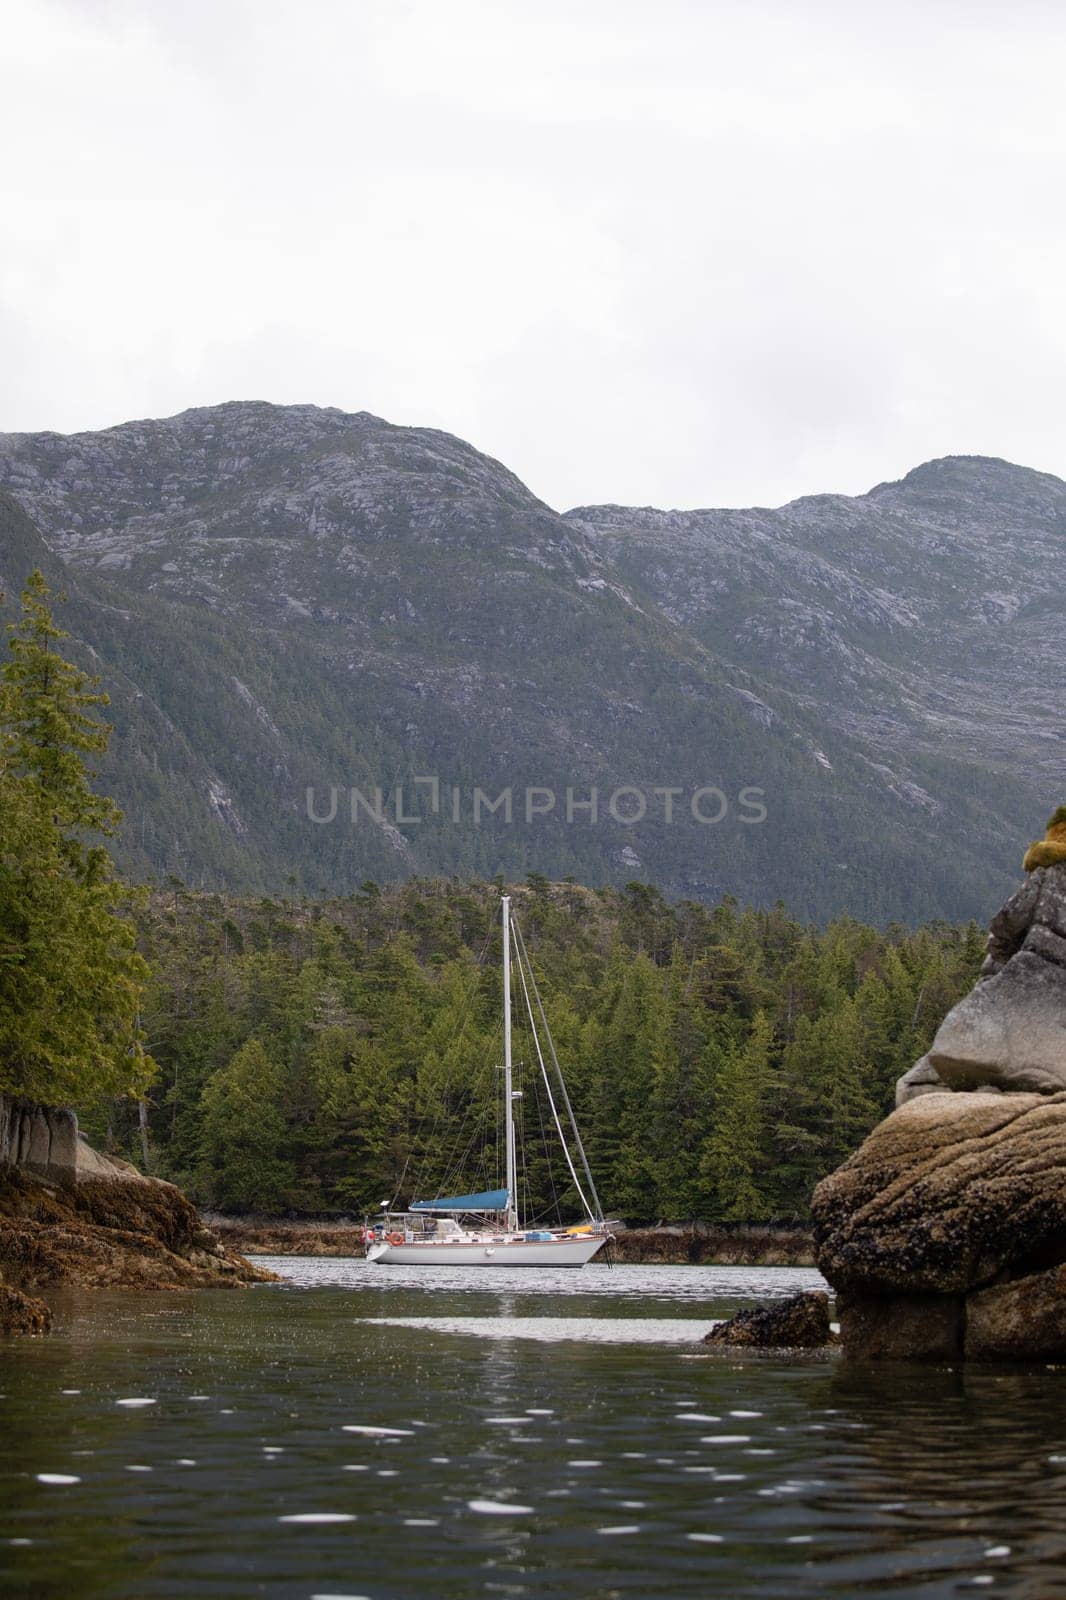 A beautiful sailboat in a remote anchorage with mountains in the background by Granchinho